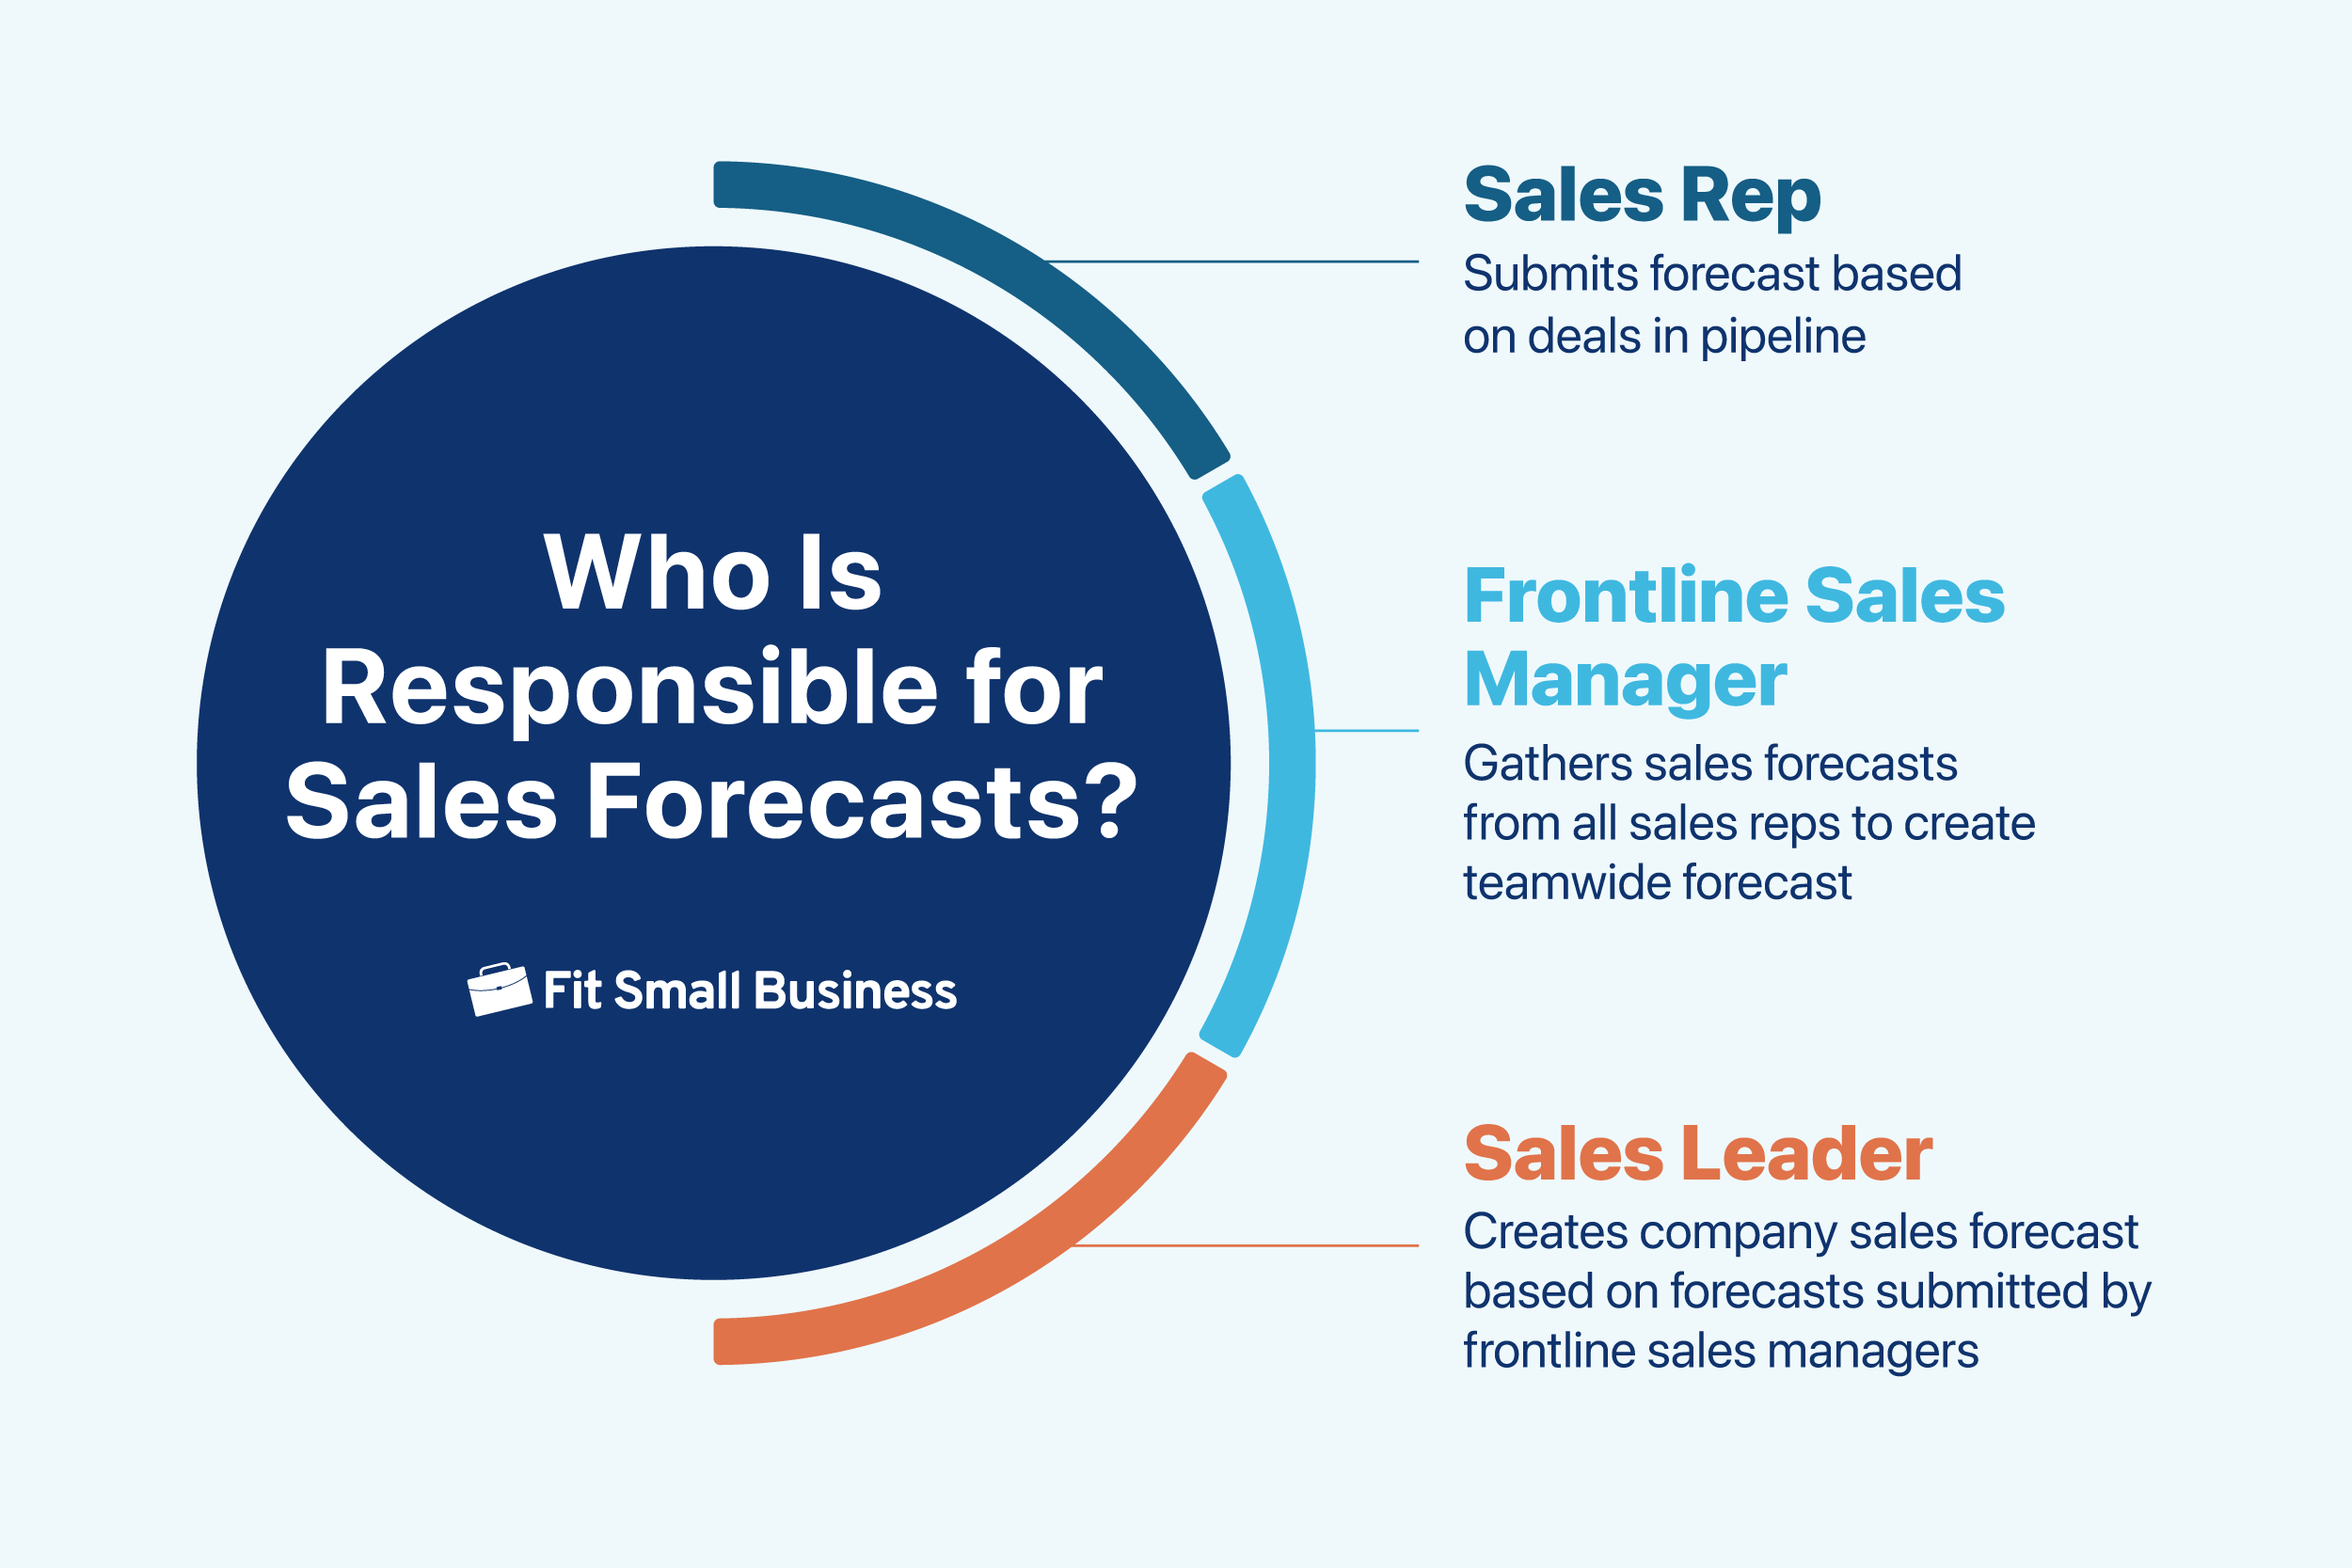 Team members responsible for sales forecasts